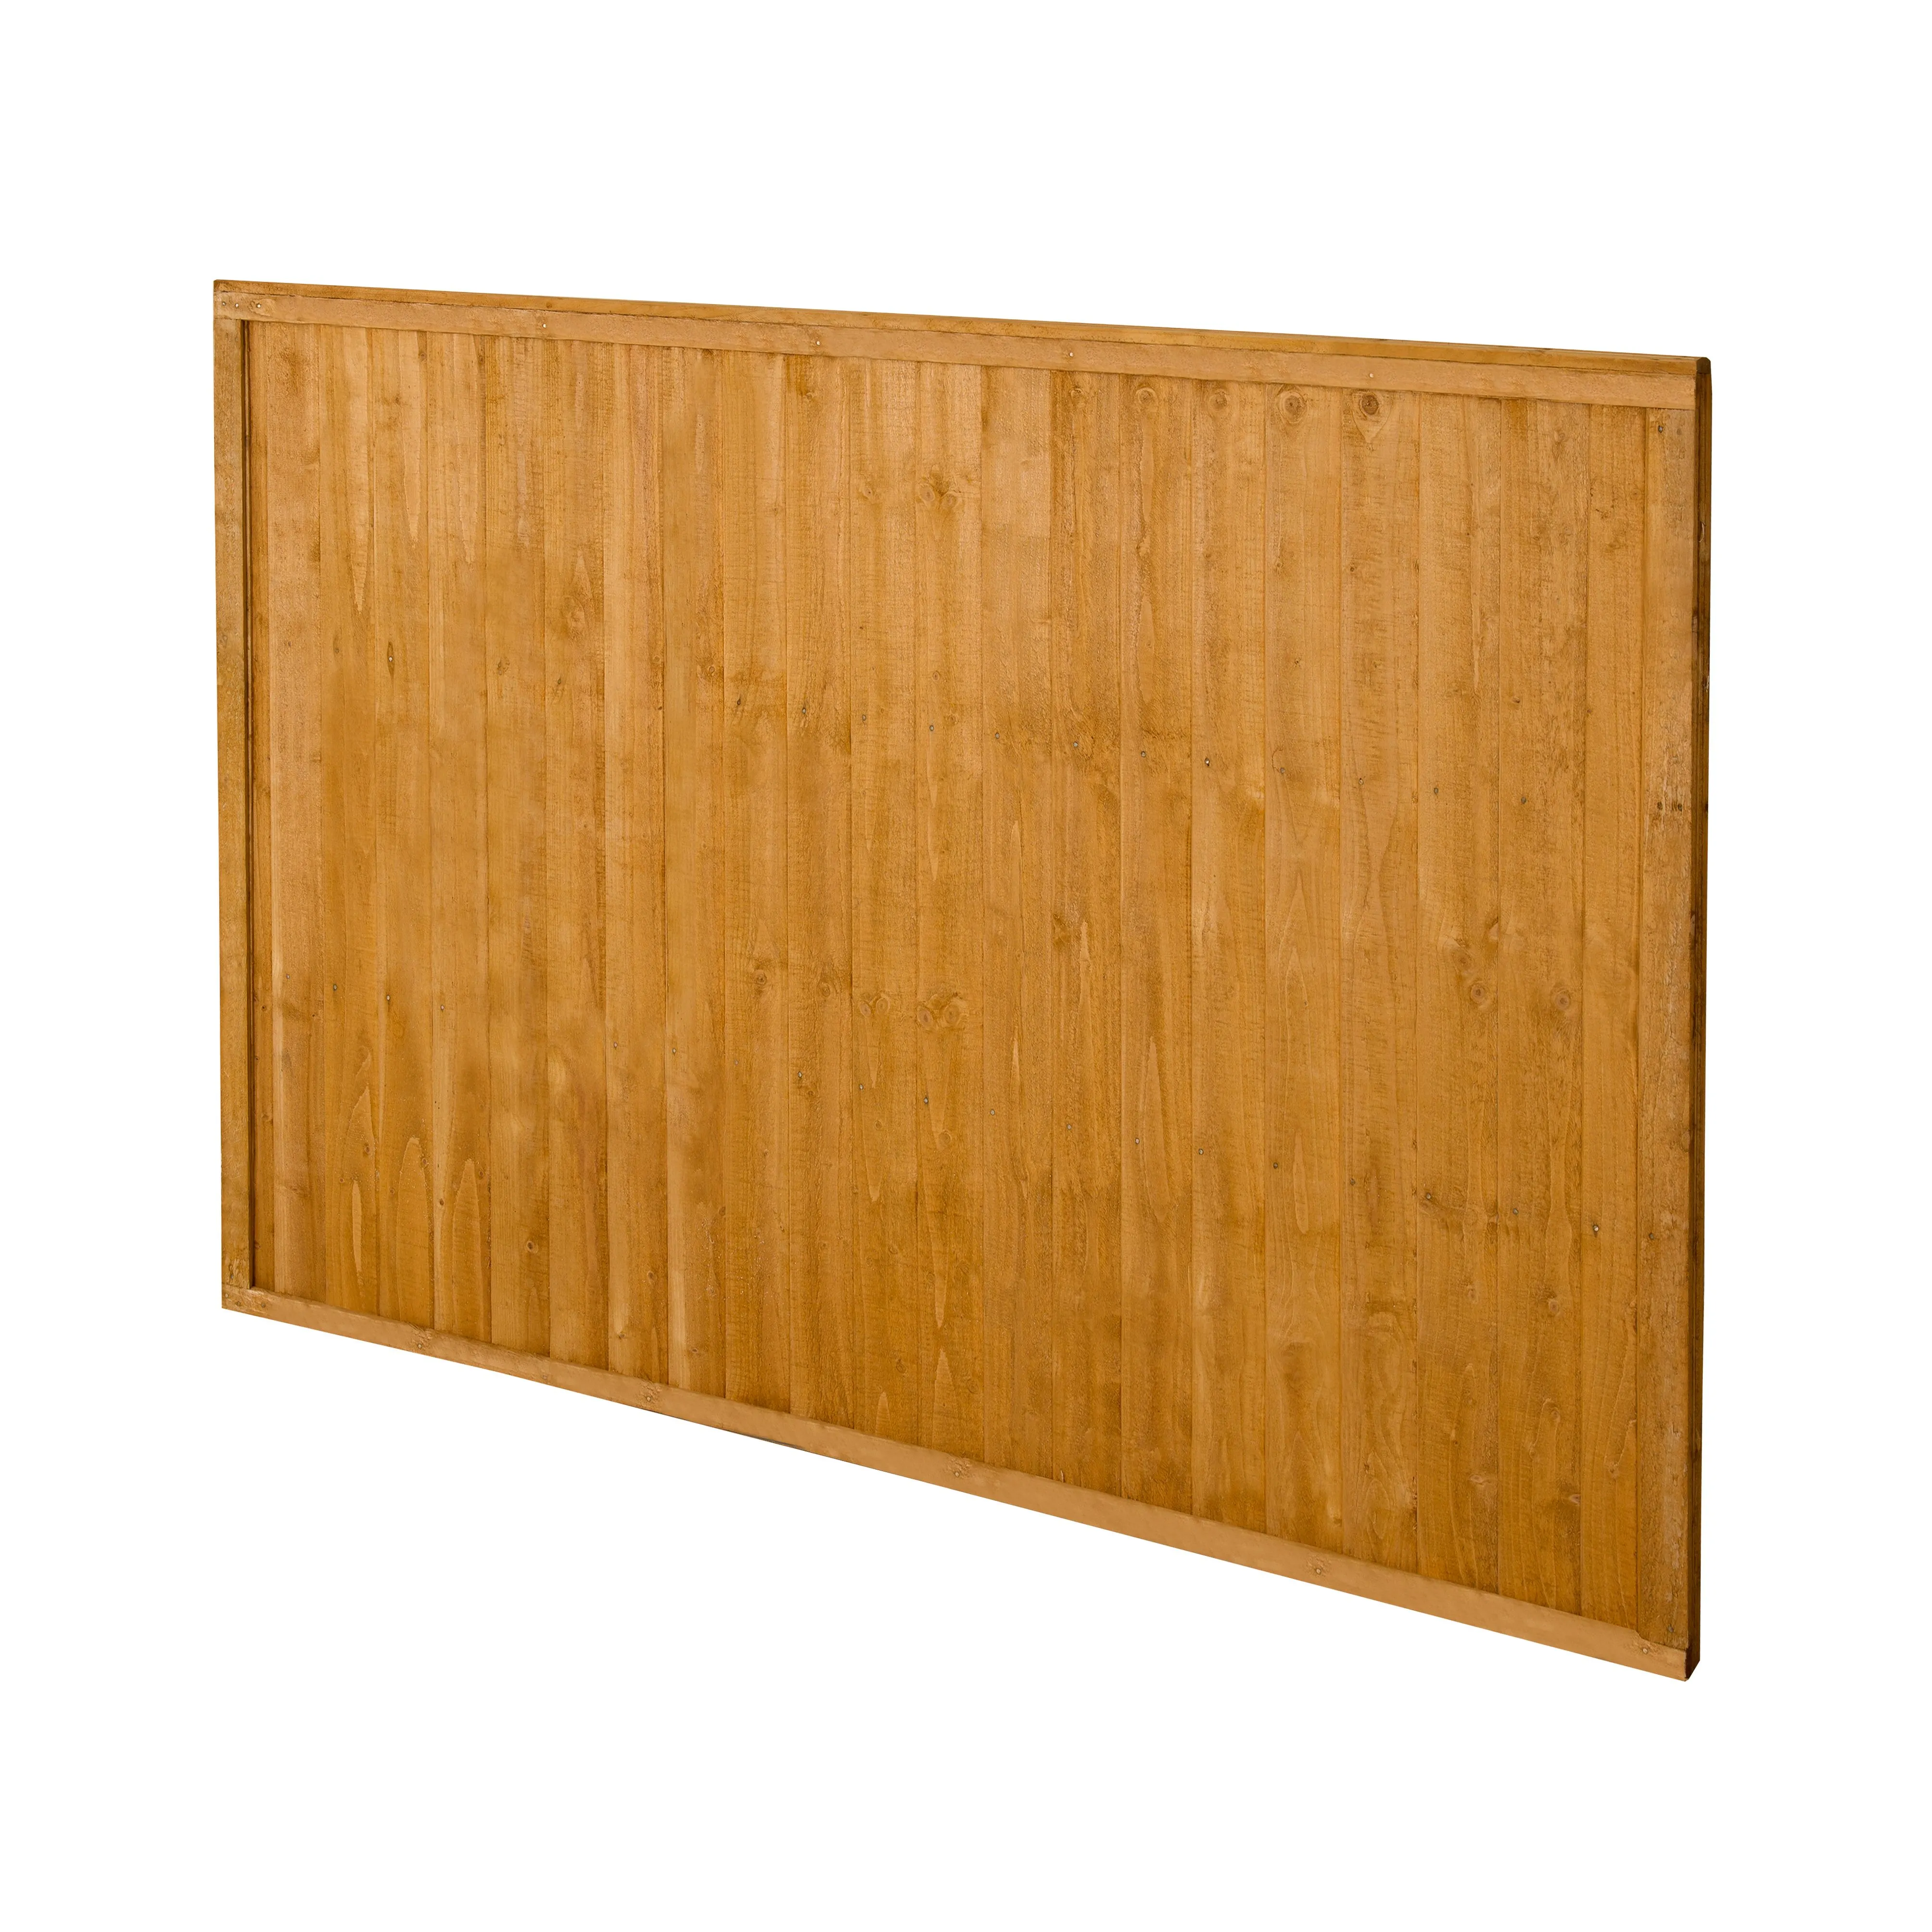 Forest Garden Closeboard Dip treated Fence panel (W)1.83m (H)1.22m, Pack of 4